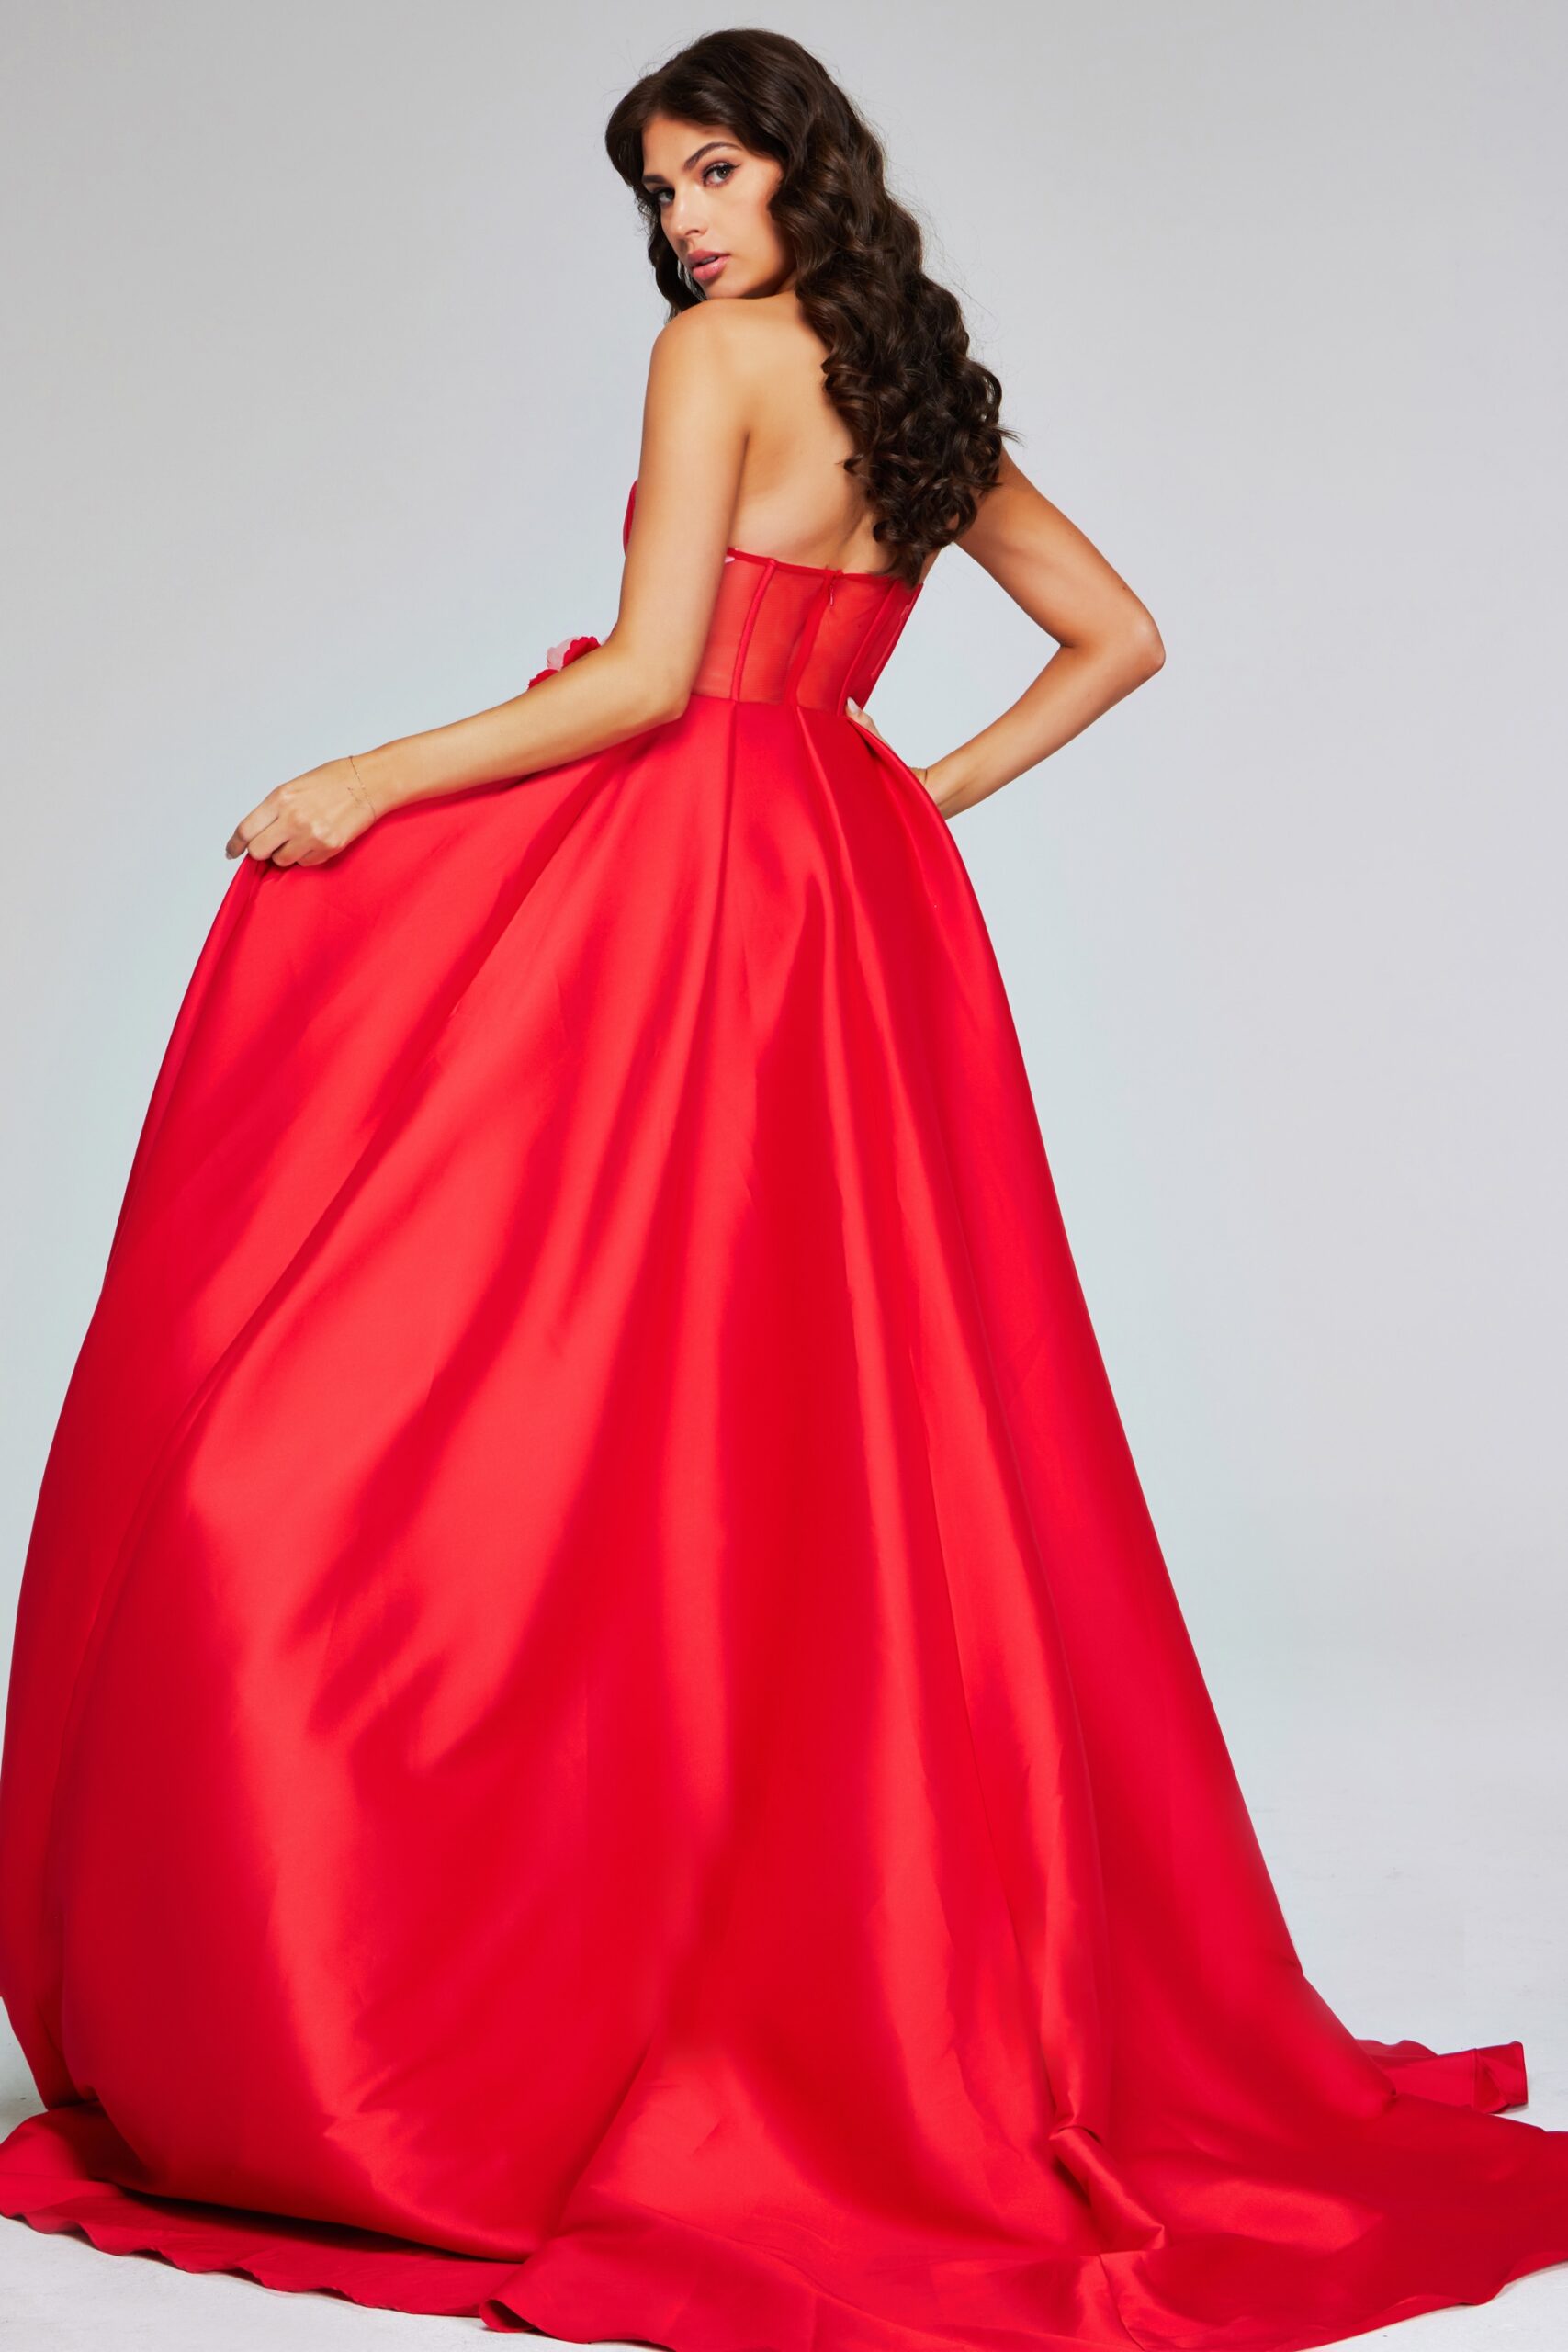 Stunning Red Strapless Gown with High Slit and Floral Accent 40826